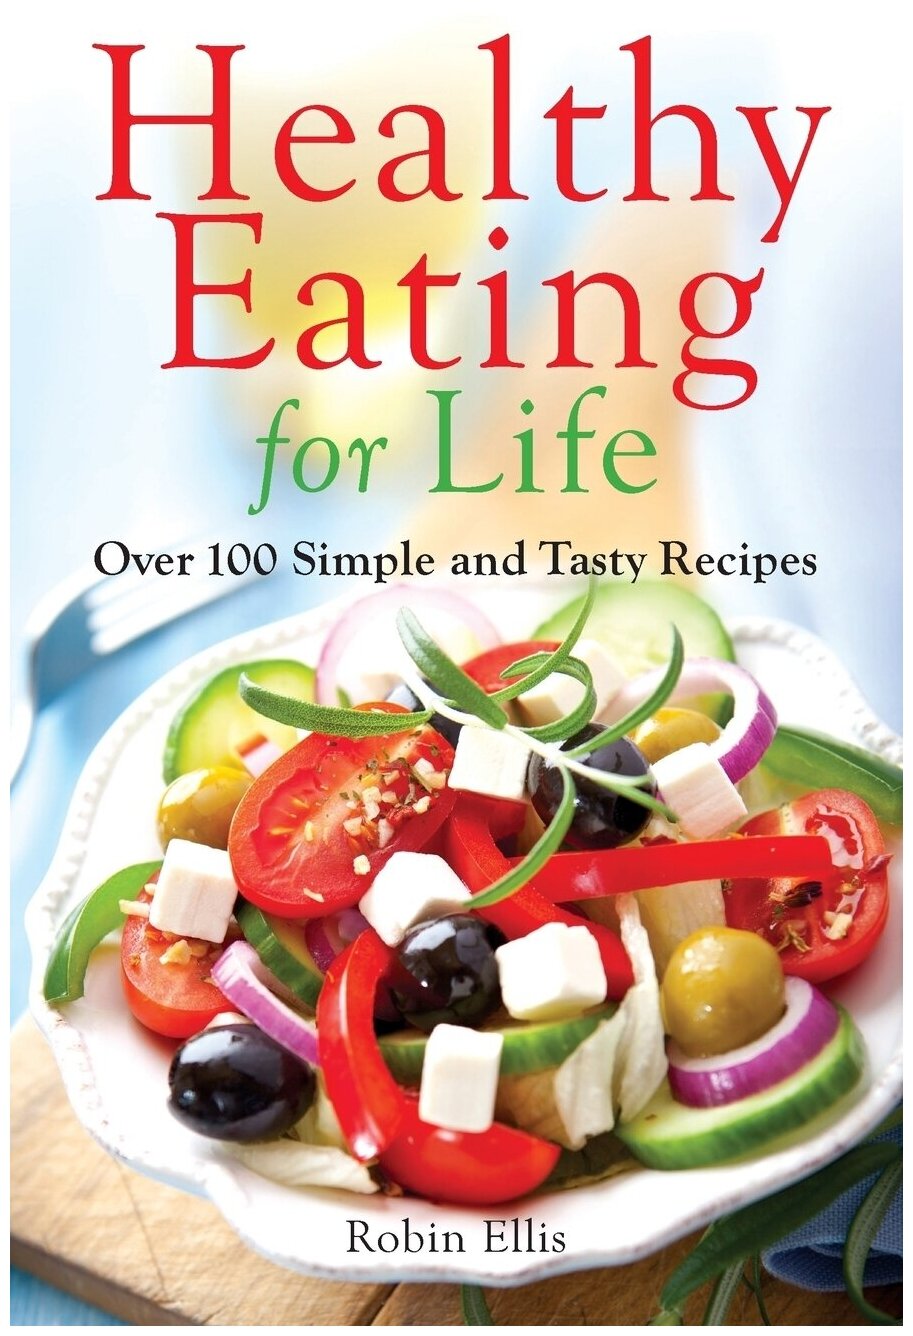 Healthy Eating for Life. Over 100 Simple and Tasty Recipes